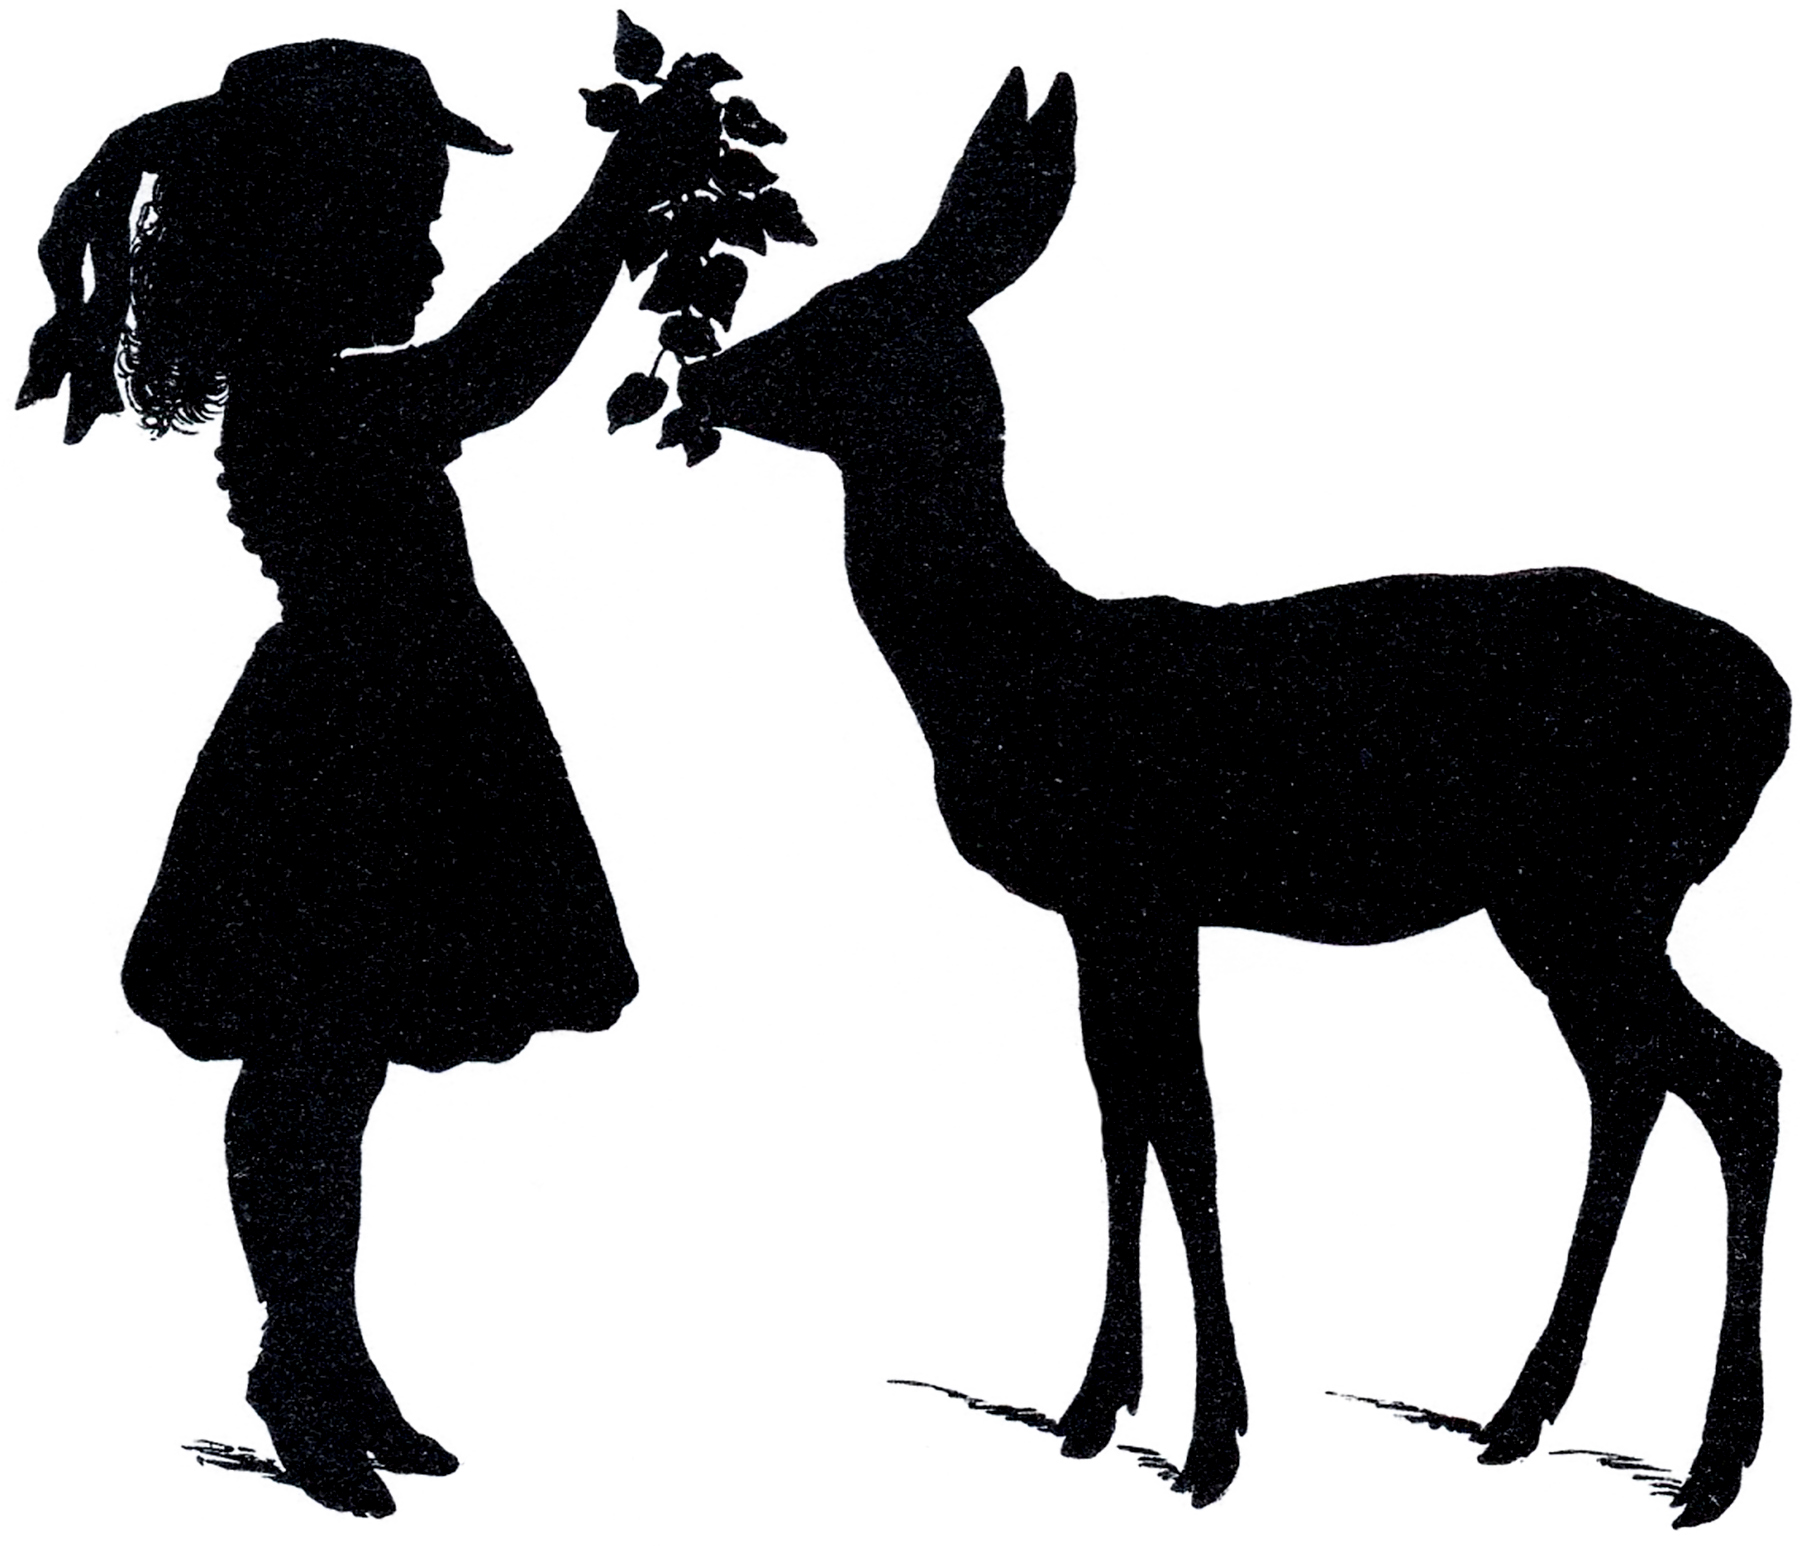 Deer-Silhouette-Girl-GraphicsFairy - The Graphics Fairy